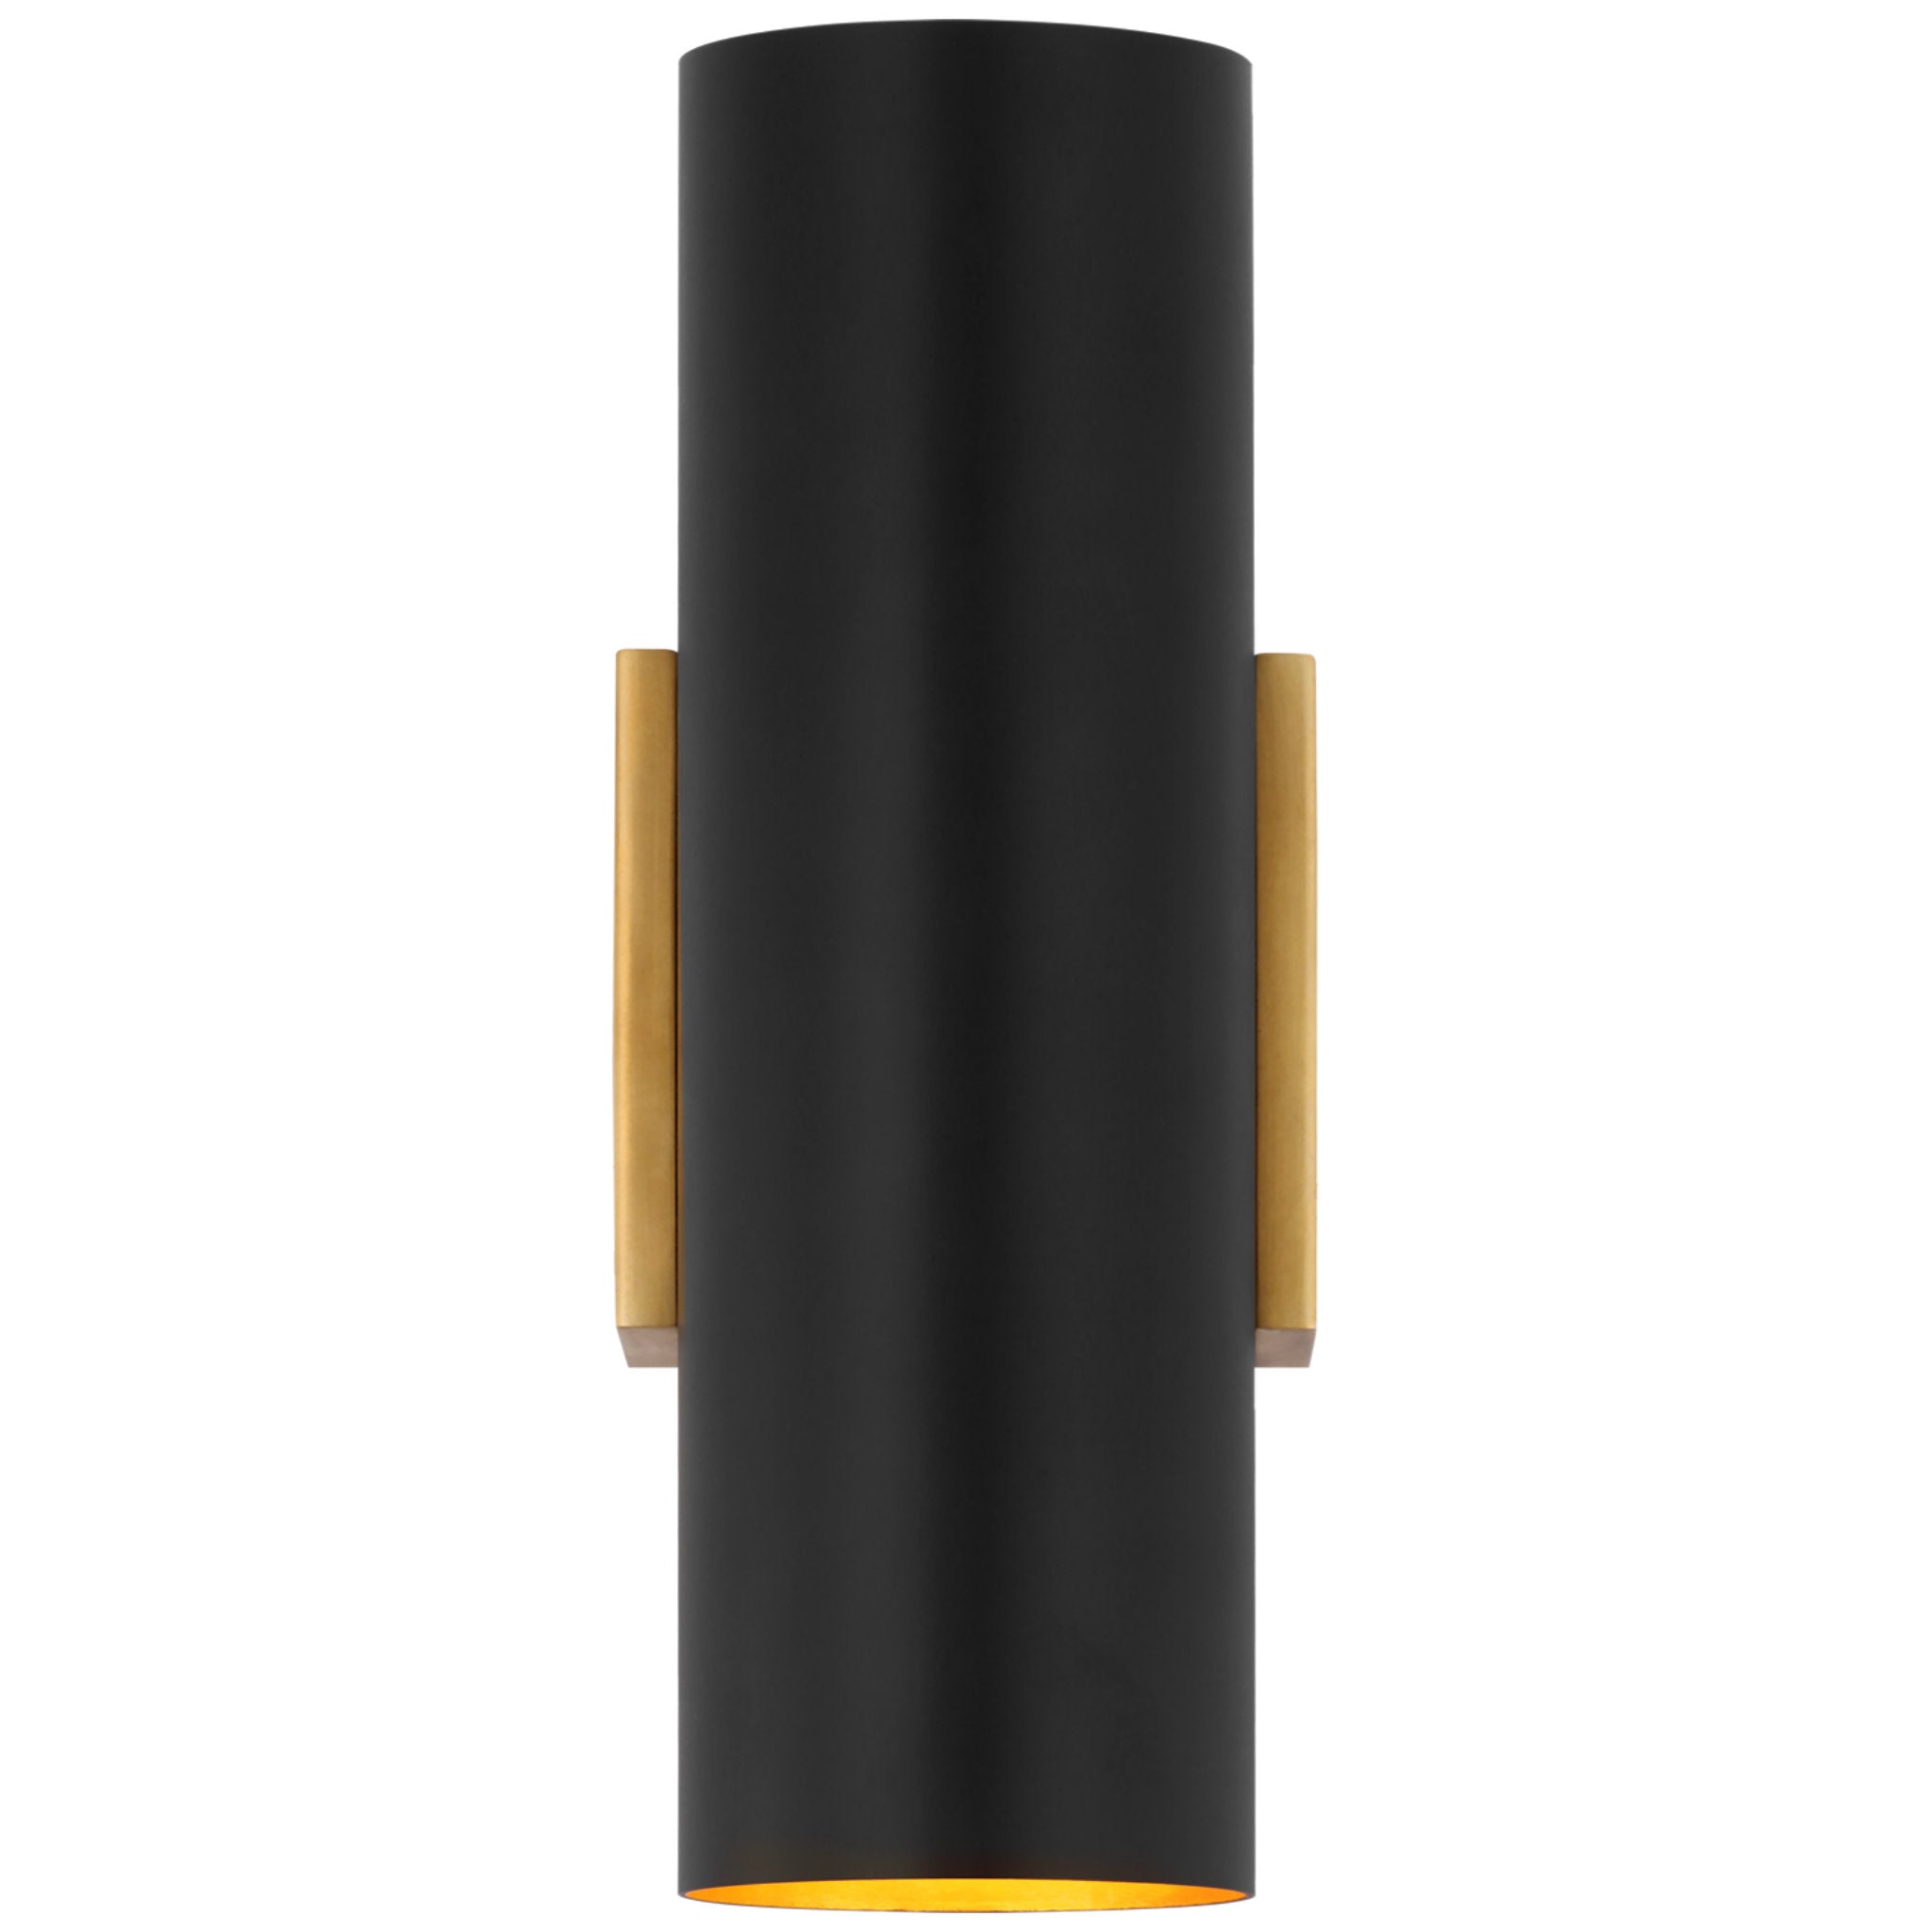 AERIN Nella Small Cylinder Sconce in Hand-Rubbed Antique Brass and Matte Black